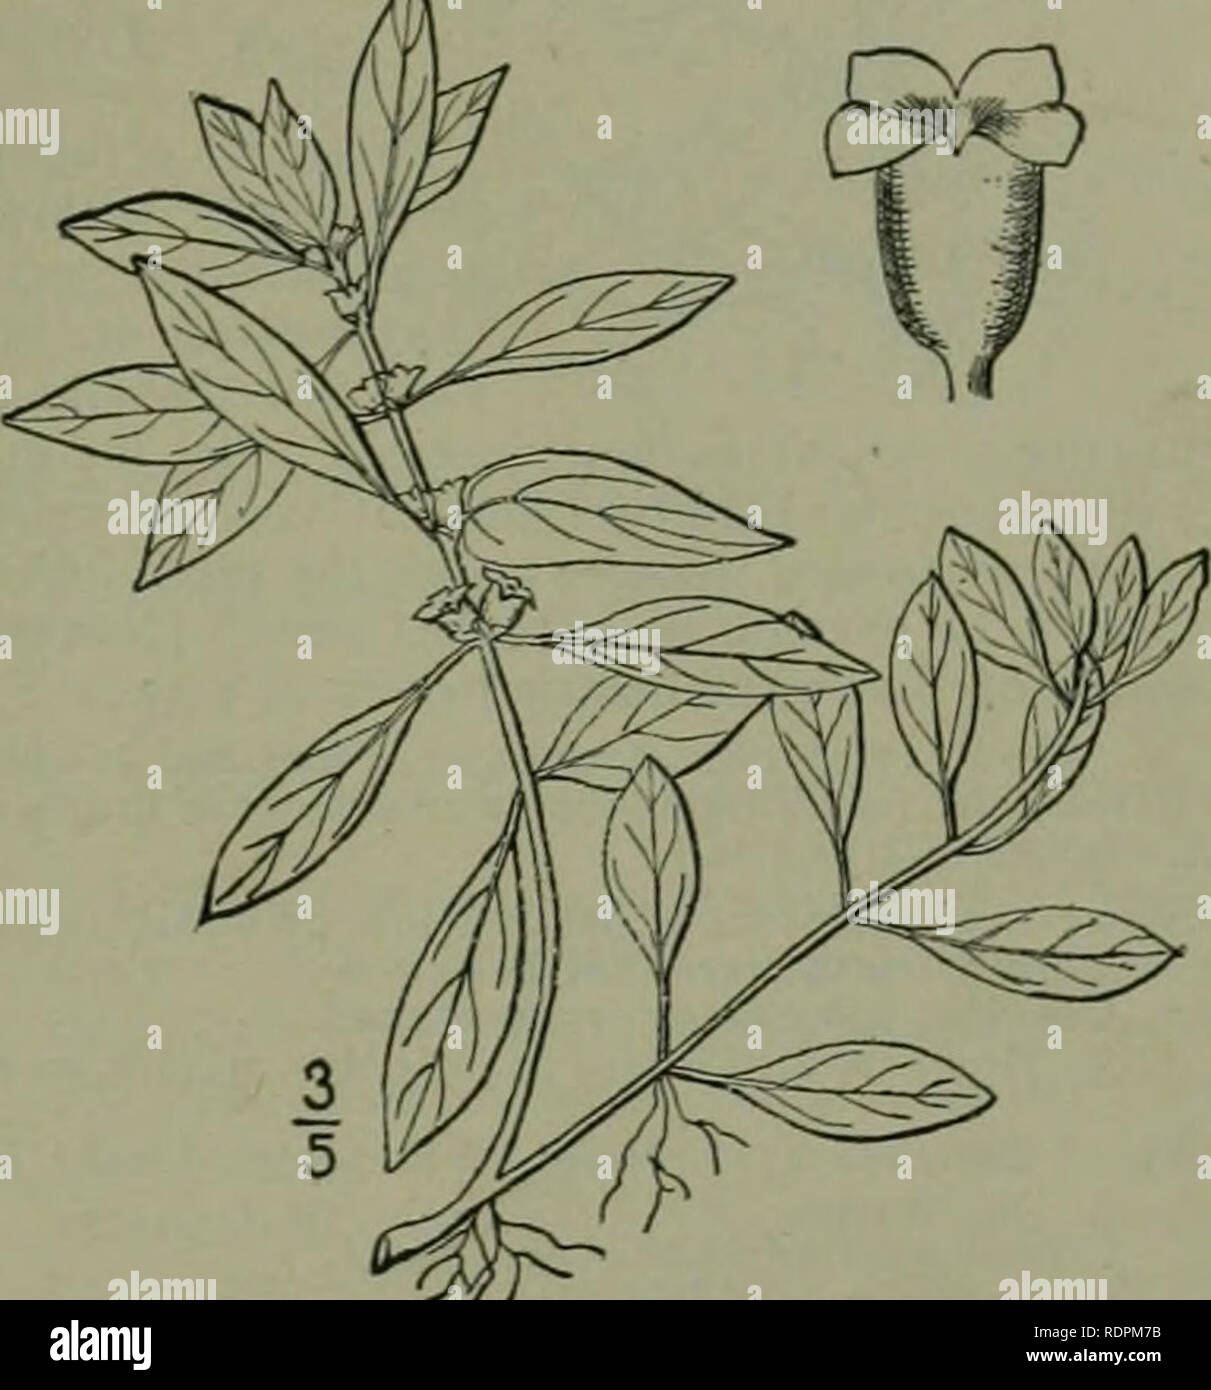 . An illustrated flora of the northern United States, Canada and the British possessions : from Newfoundland to the parallel of the southern boundary of Virginia and from the Atlantic Ocean westward to the 102nd meridian. Botany. Genus i. EVEXING-PIilMROSE FAMILY. 5-^5 B. Fruit indehisceni, nut-like. Calyx-tube obconic ; filaments with scales at the base ; ovary 4-celIed. 18. Gaiira. Calyx-tube filiform; filaments unappendaged : ovary i-celled. 19. Stcnosiphon. 2. Floral whorls of 2 parts. 20. Circaea. I. ISNARDIA L. Sp. PI. 120. 1753. Annual or perennial succulent herbs. Stems prostrate or de Stock Photo